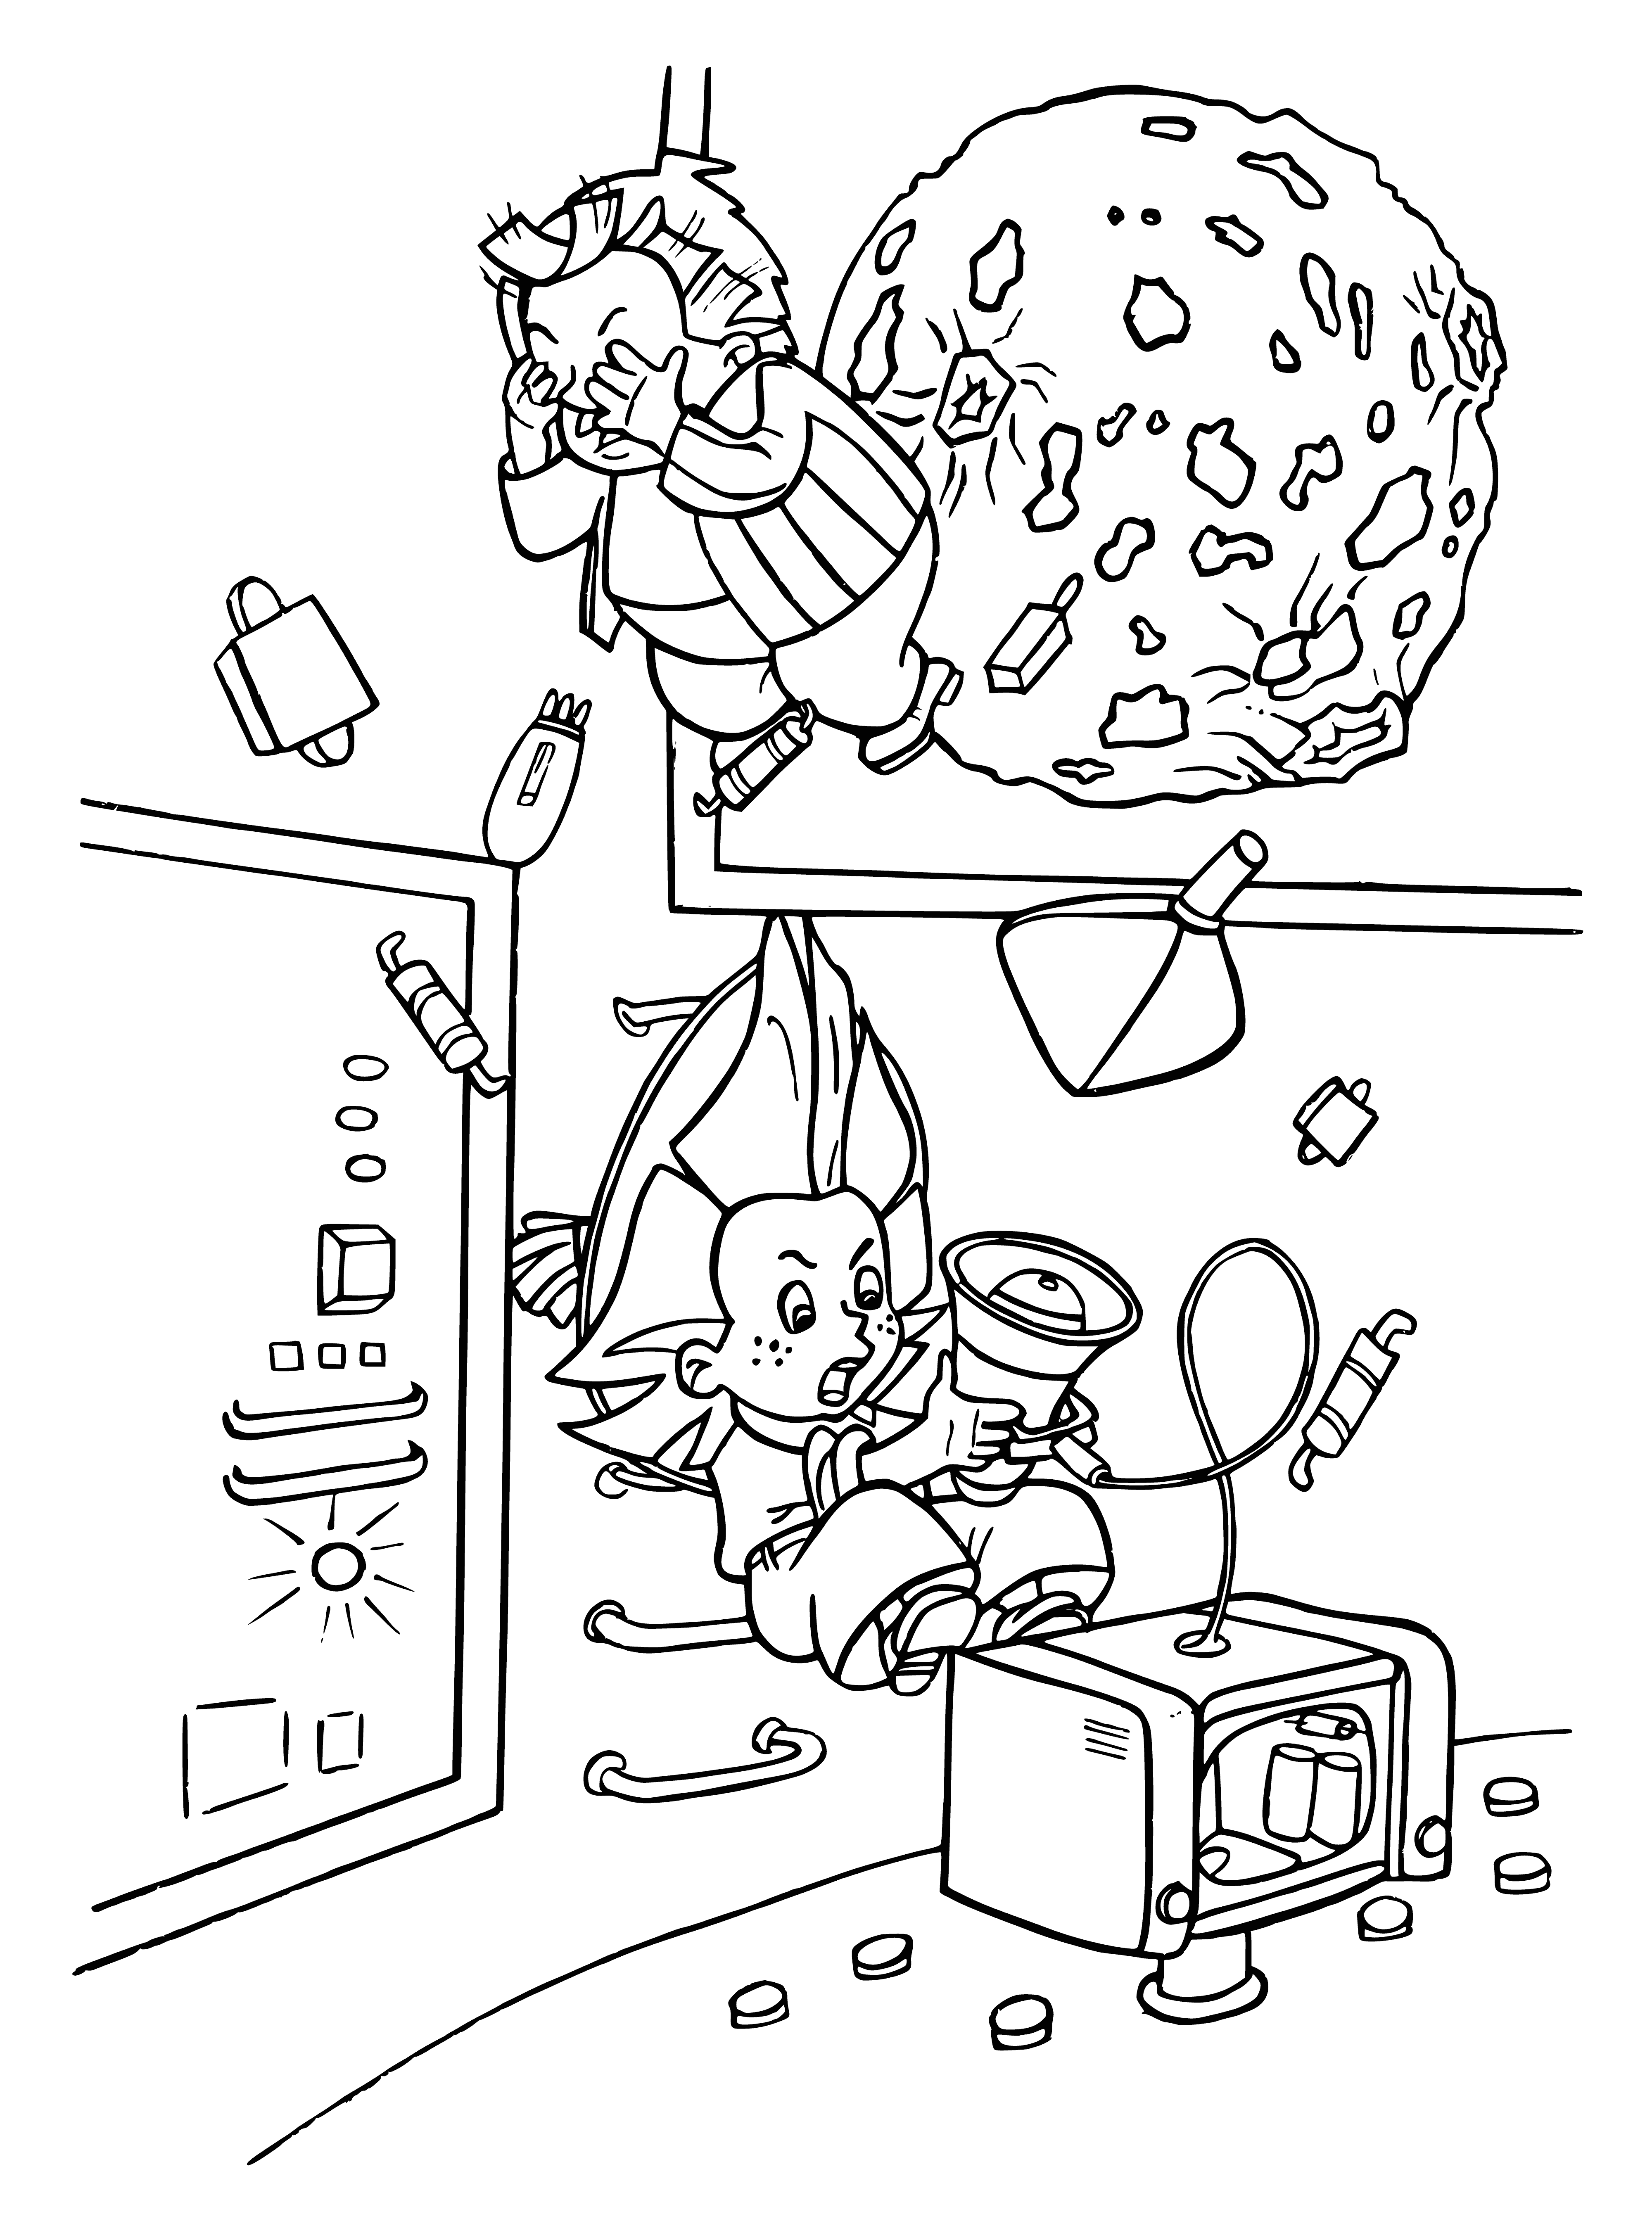 coloring page: Boy in suit floats in space, but has safety tether attached to large satellite.